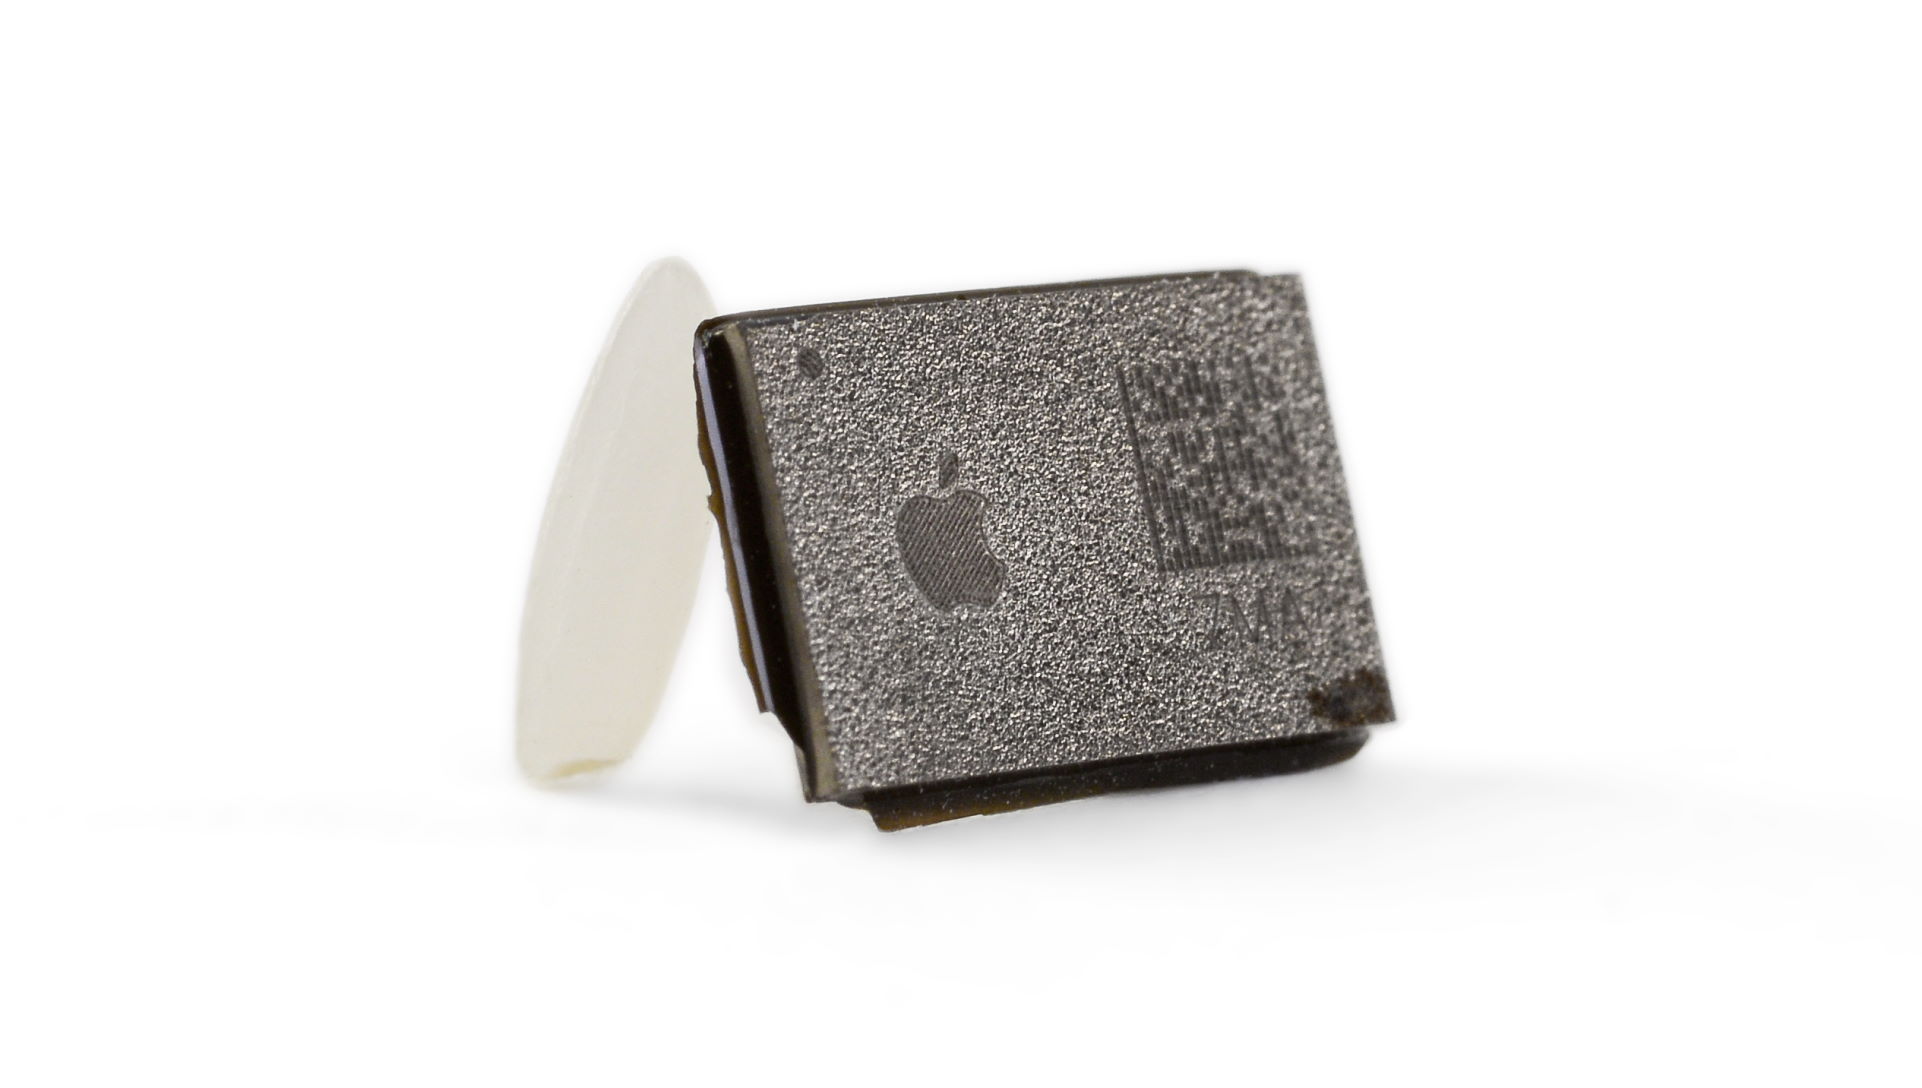 A microcontroller with Apple branding leant up against a grain of rice for scale